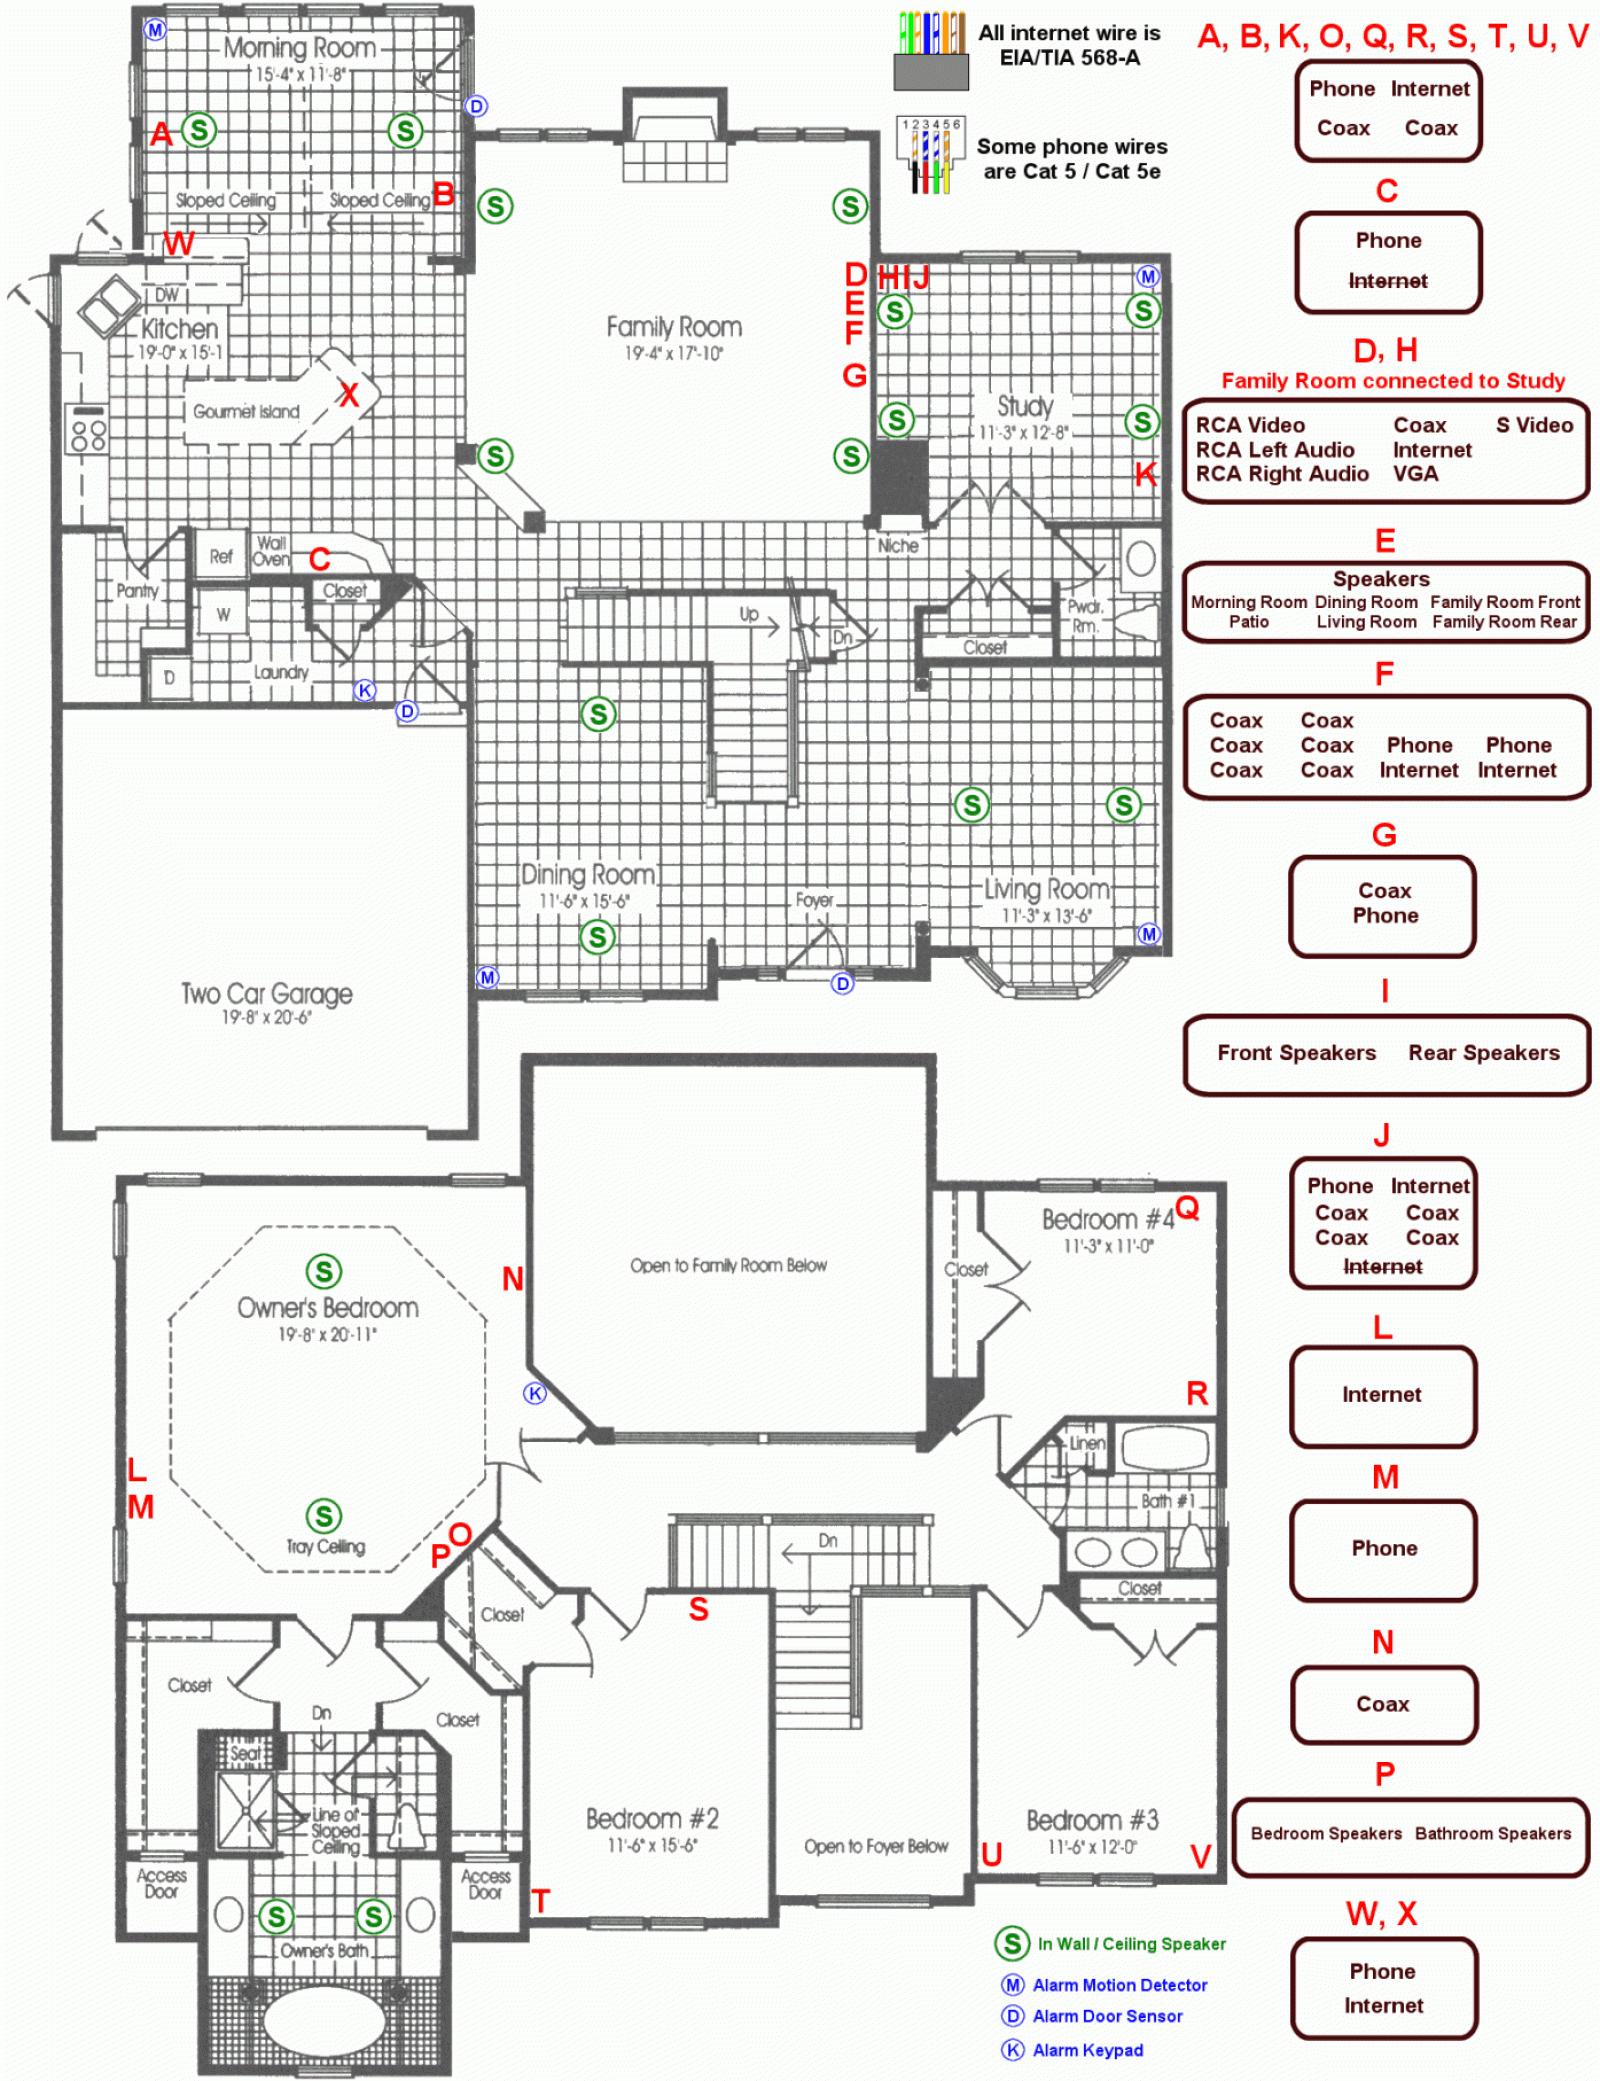 House Schematic Wiring Diagram - Wiring Diagrams Thumbs - Residential Wiring Diagram